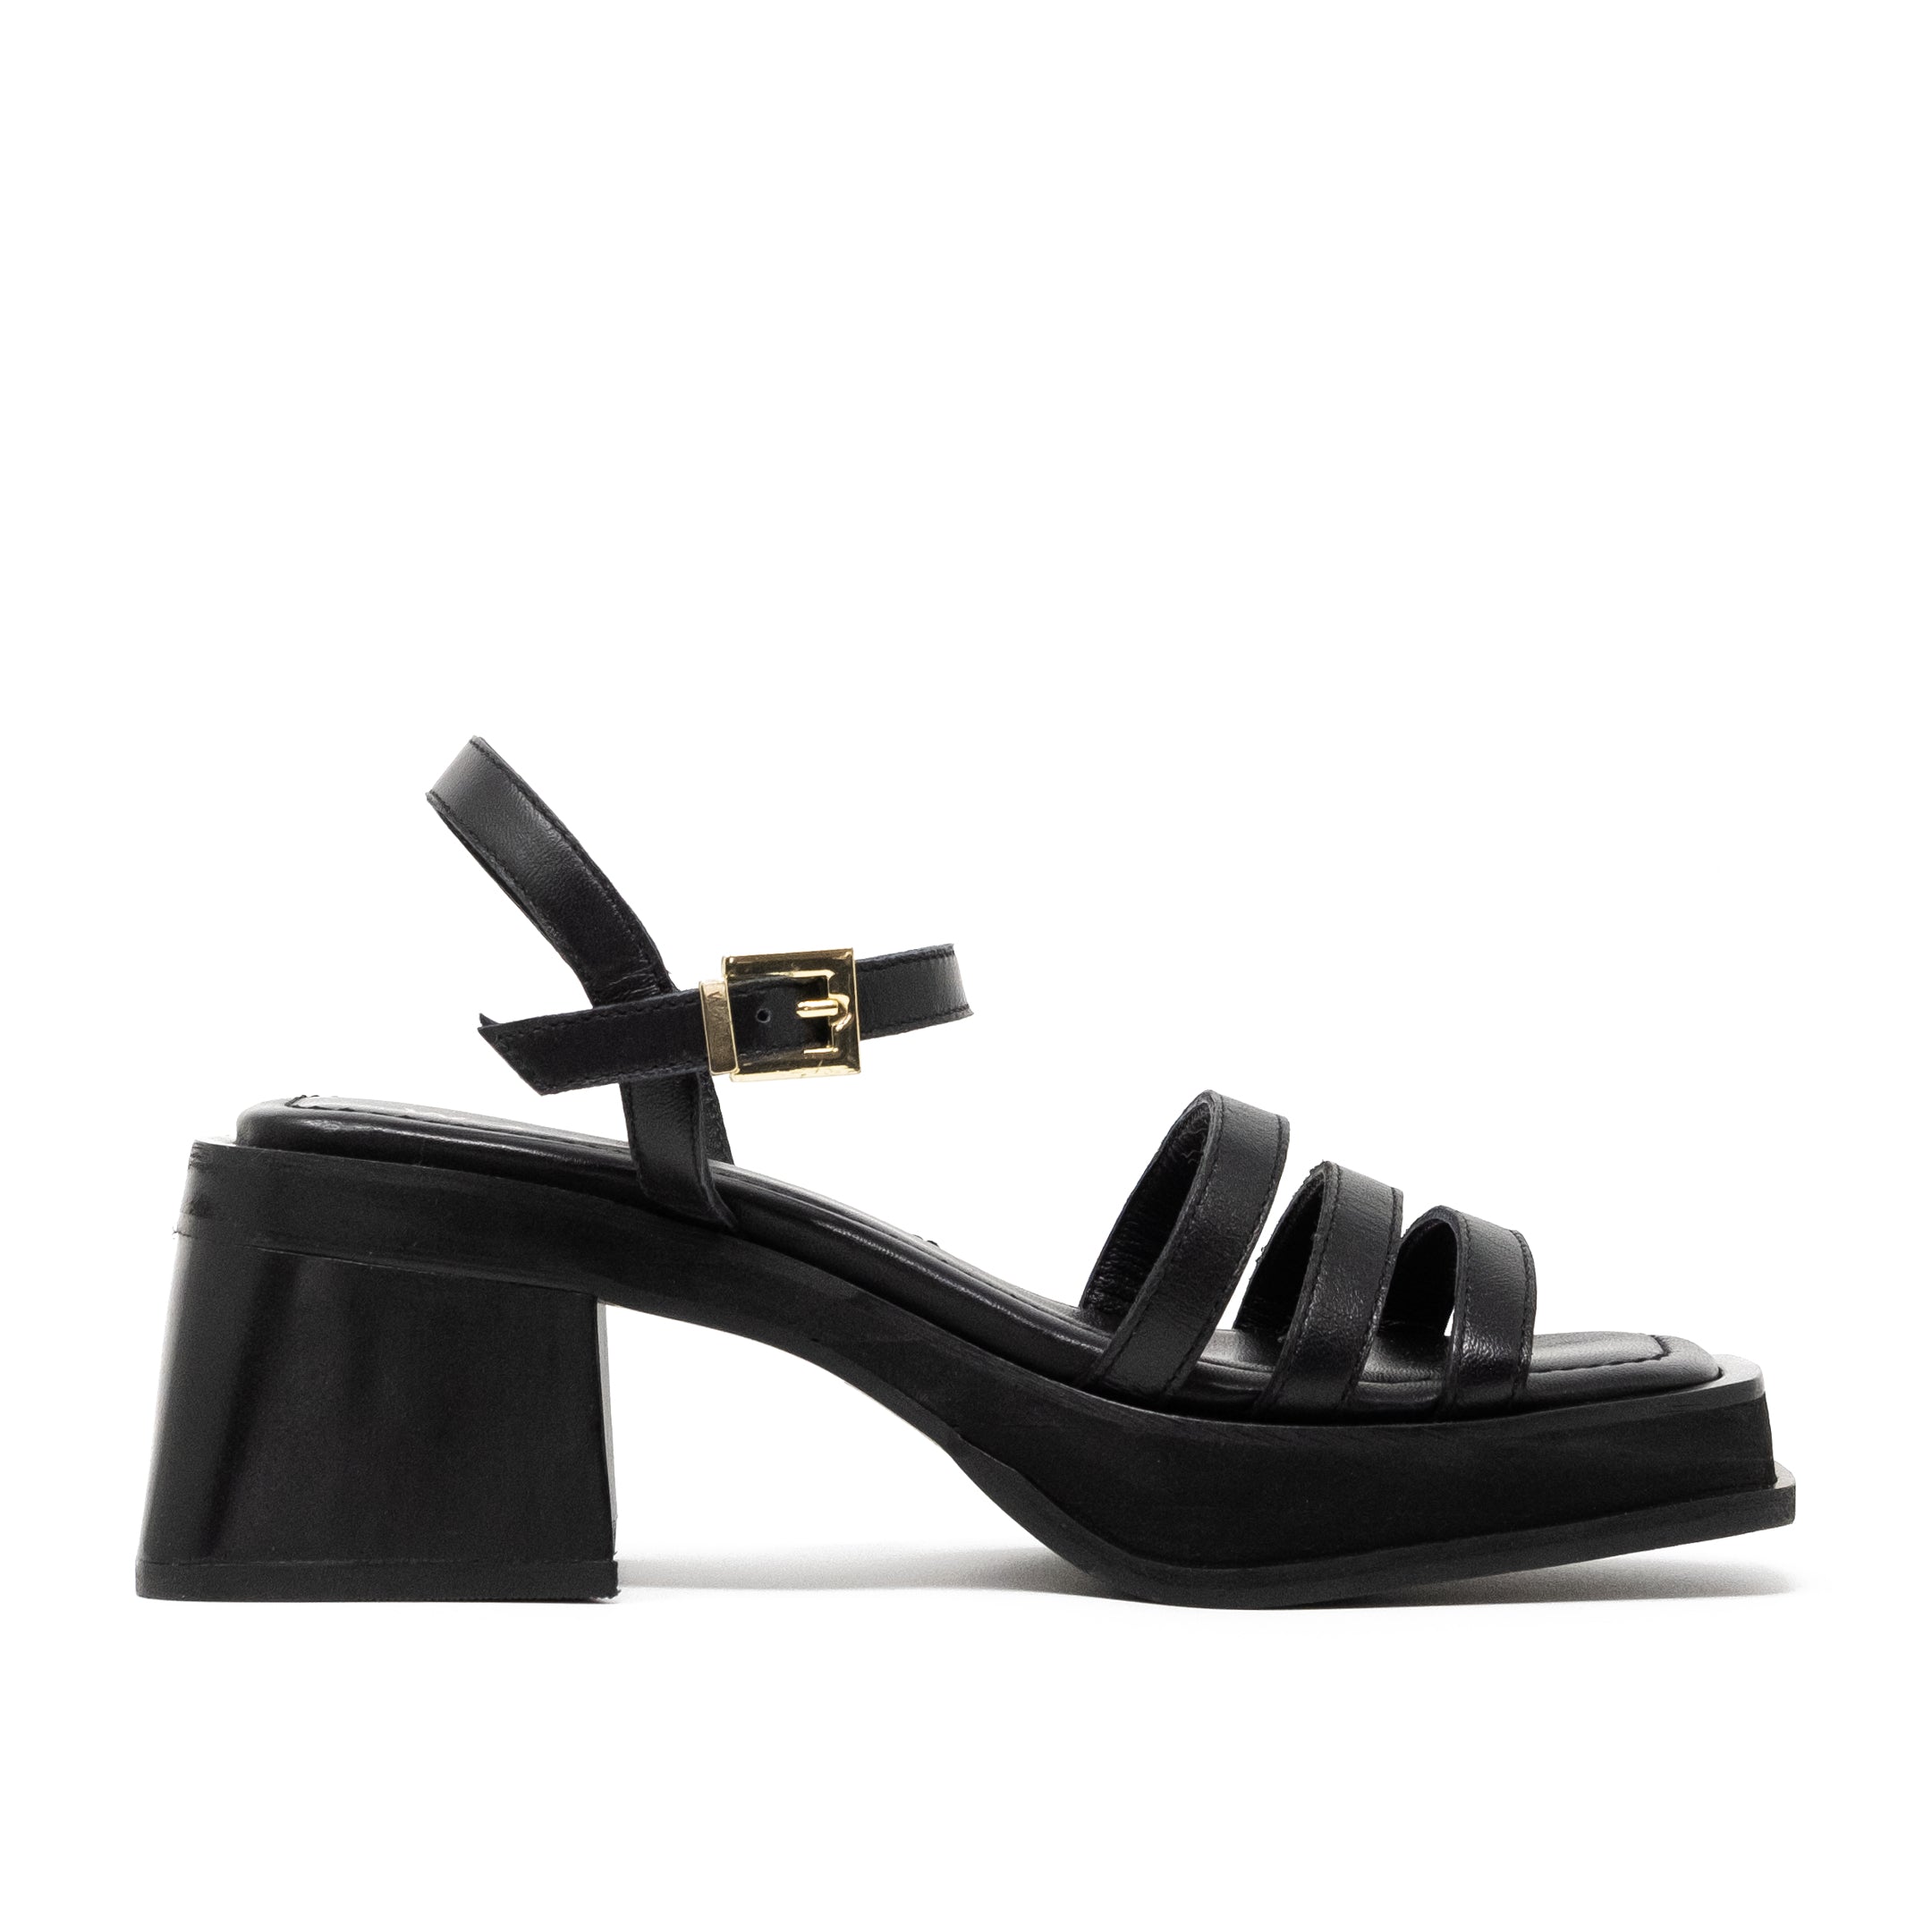 Walk London Lily Ankle Strap Sandal in Black Leather